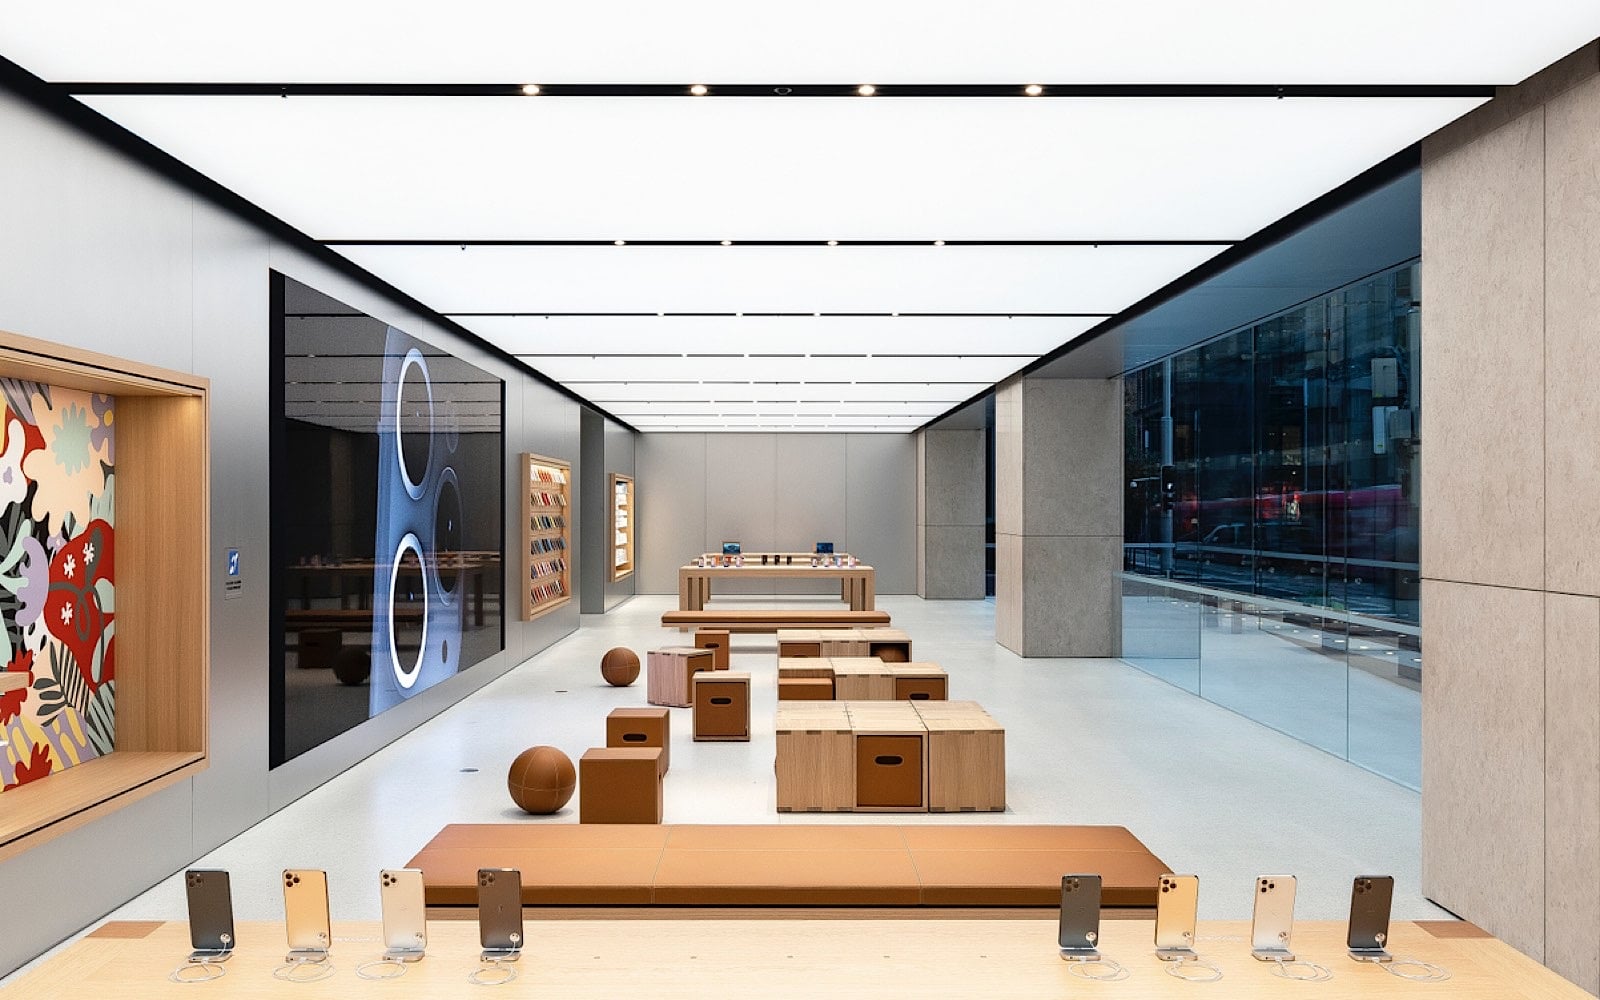 Apple Store Sydney, opening in May 2020